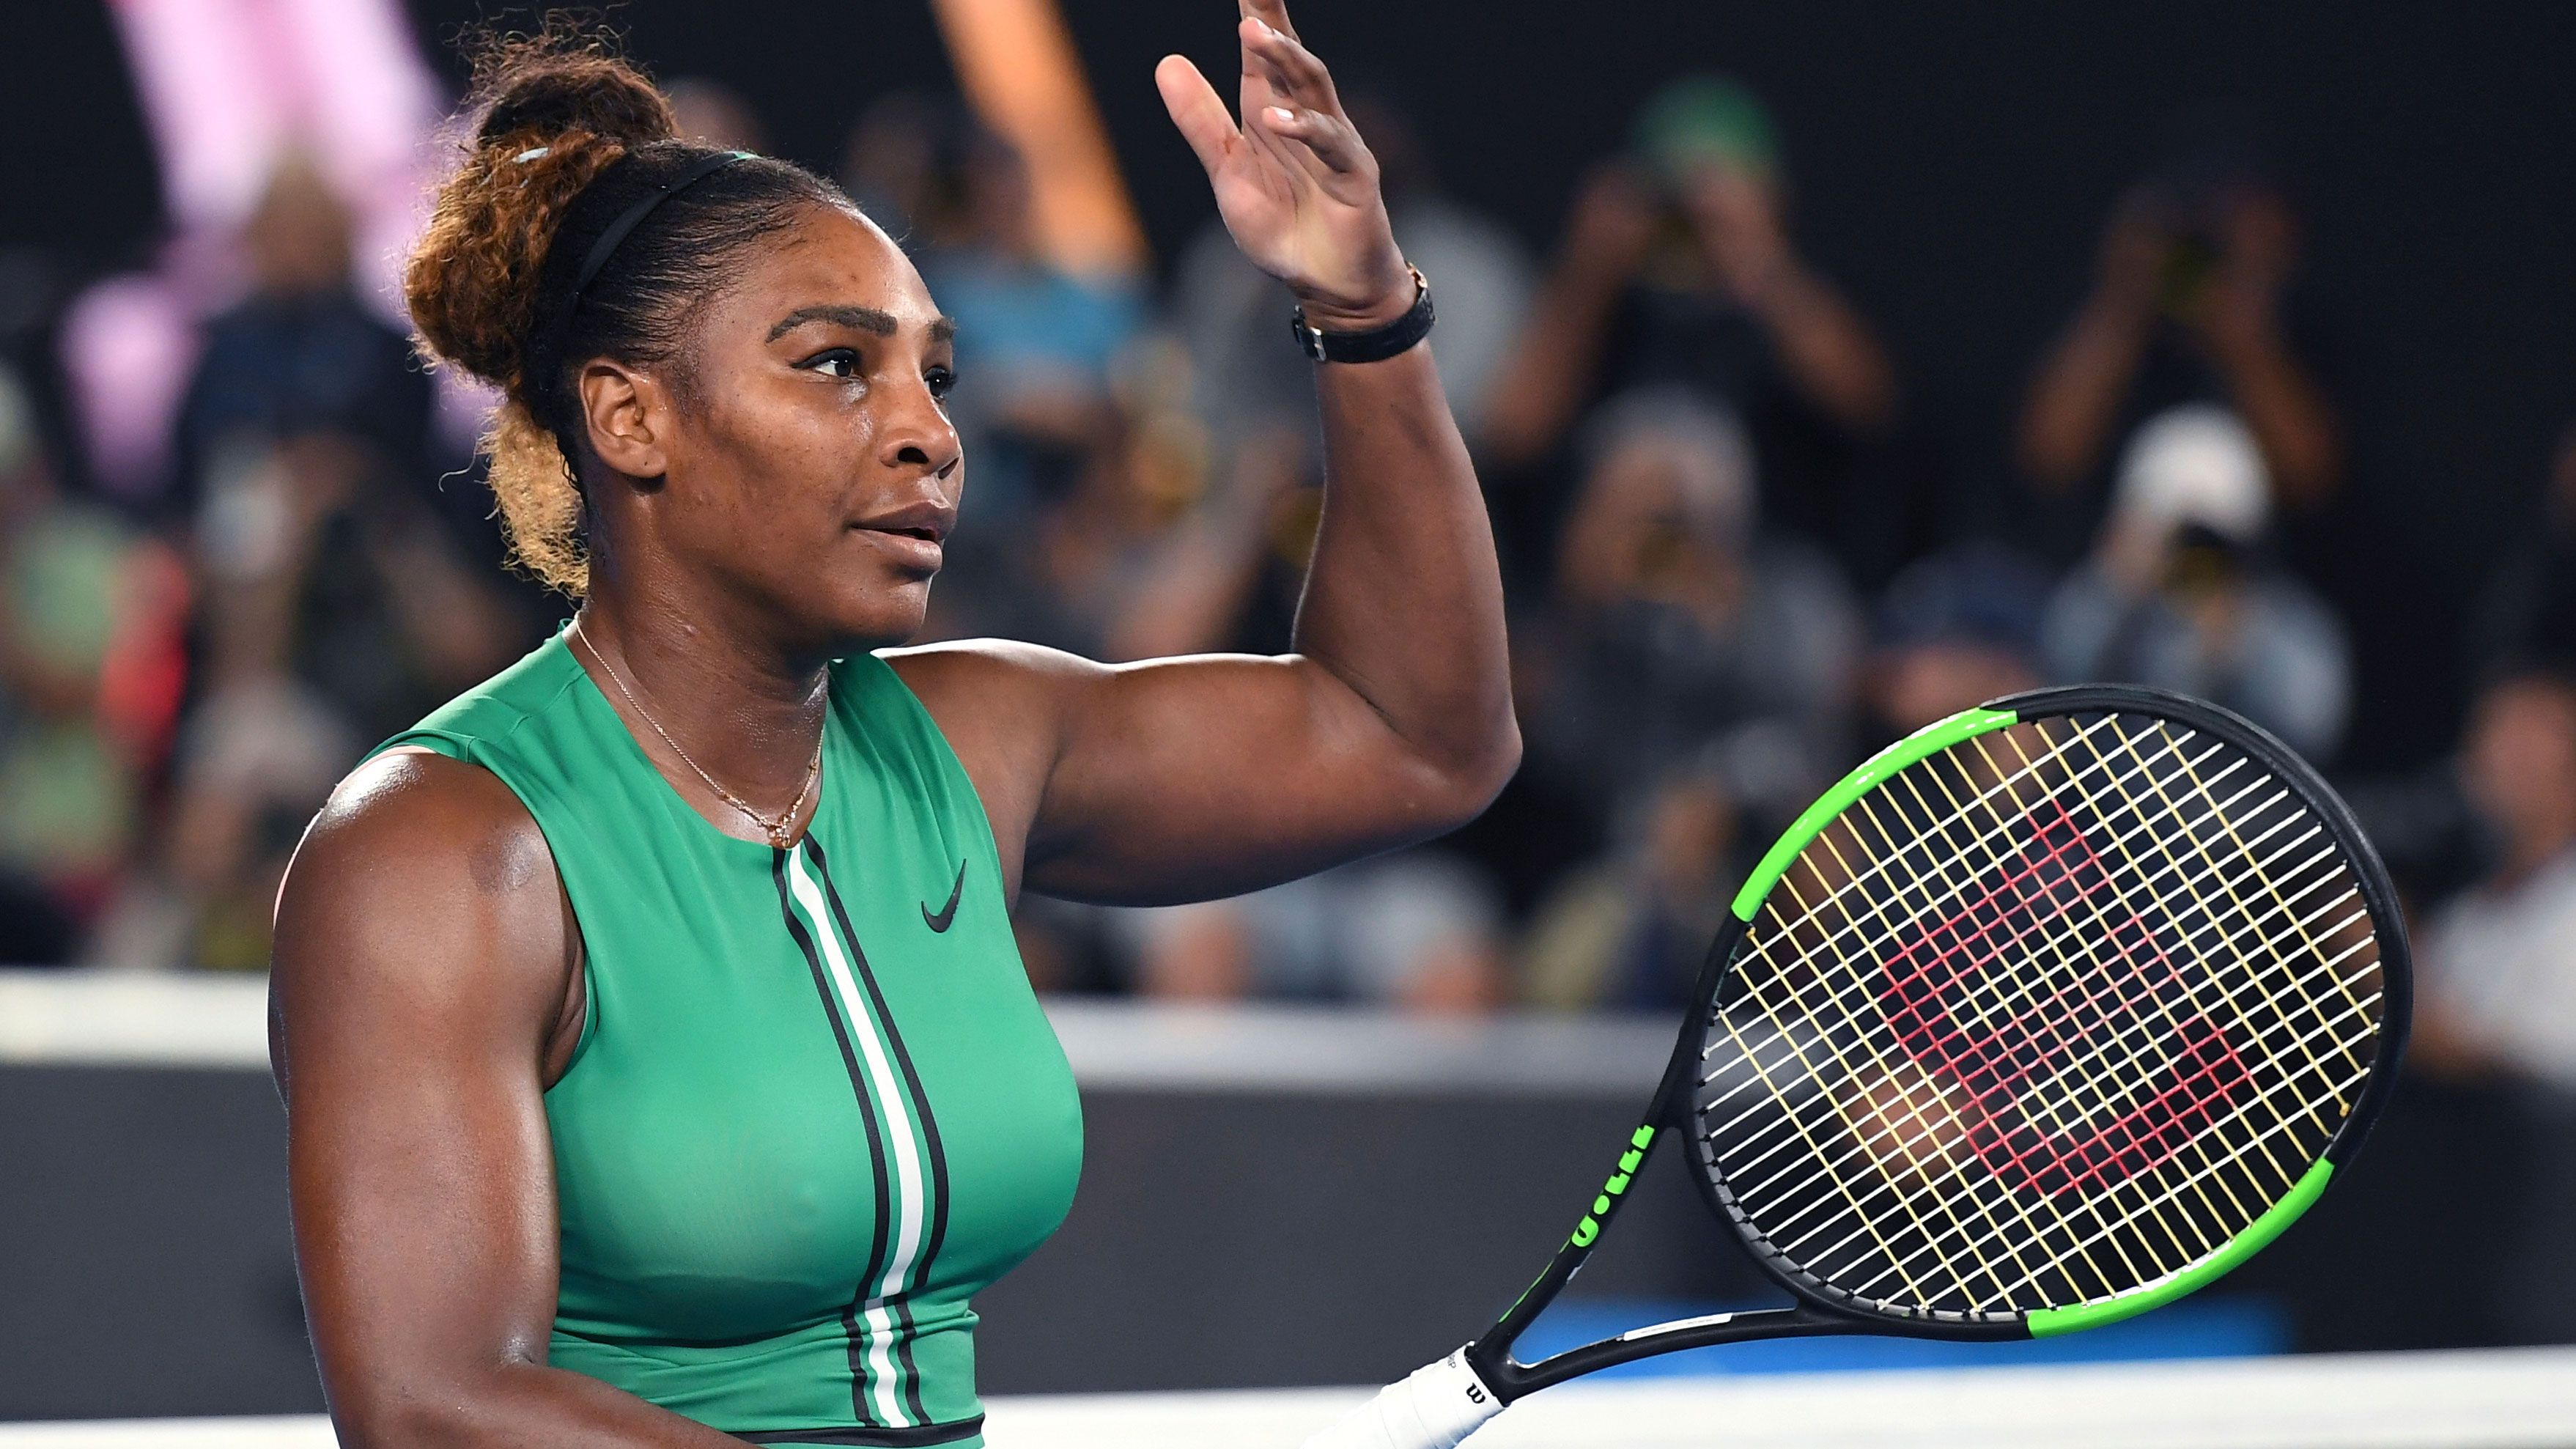 The biggest problem with debate about Serena Williams as the GOAT